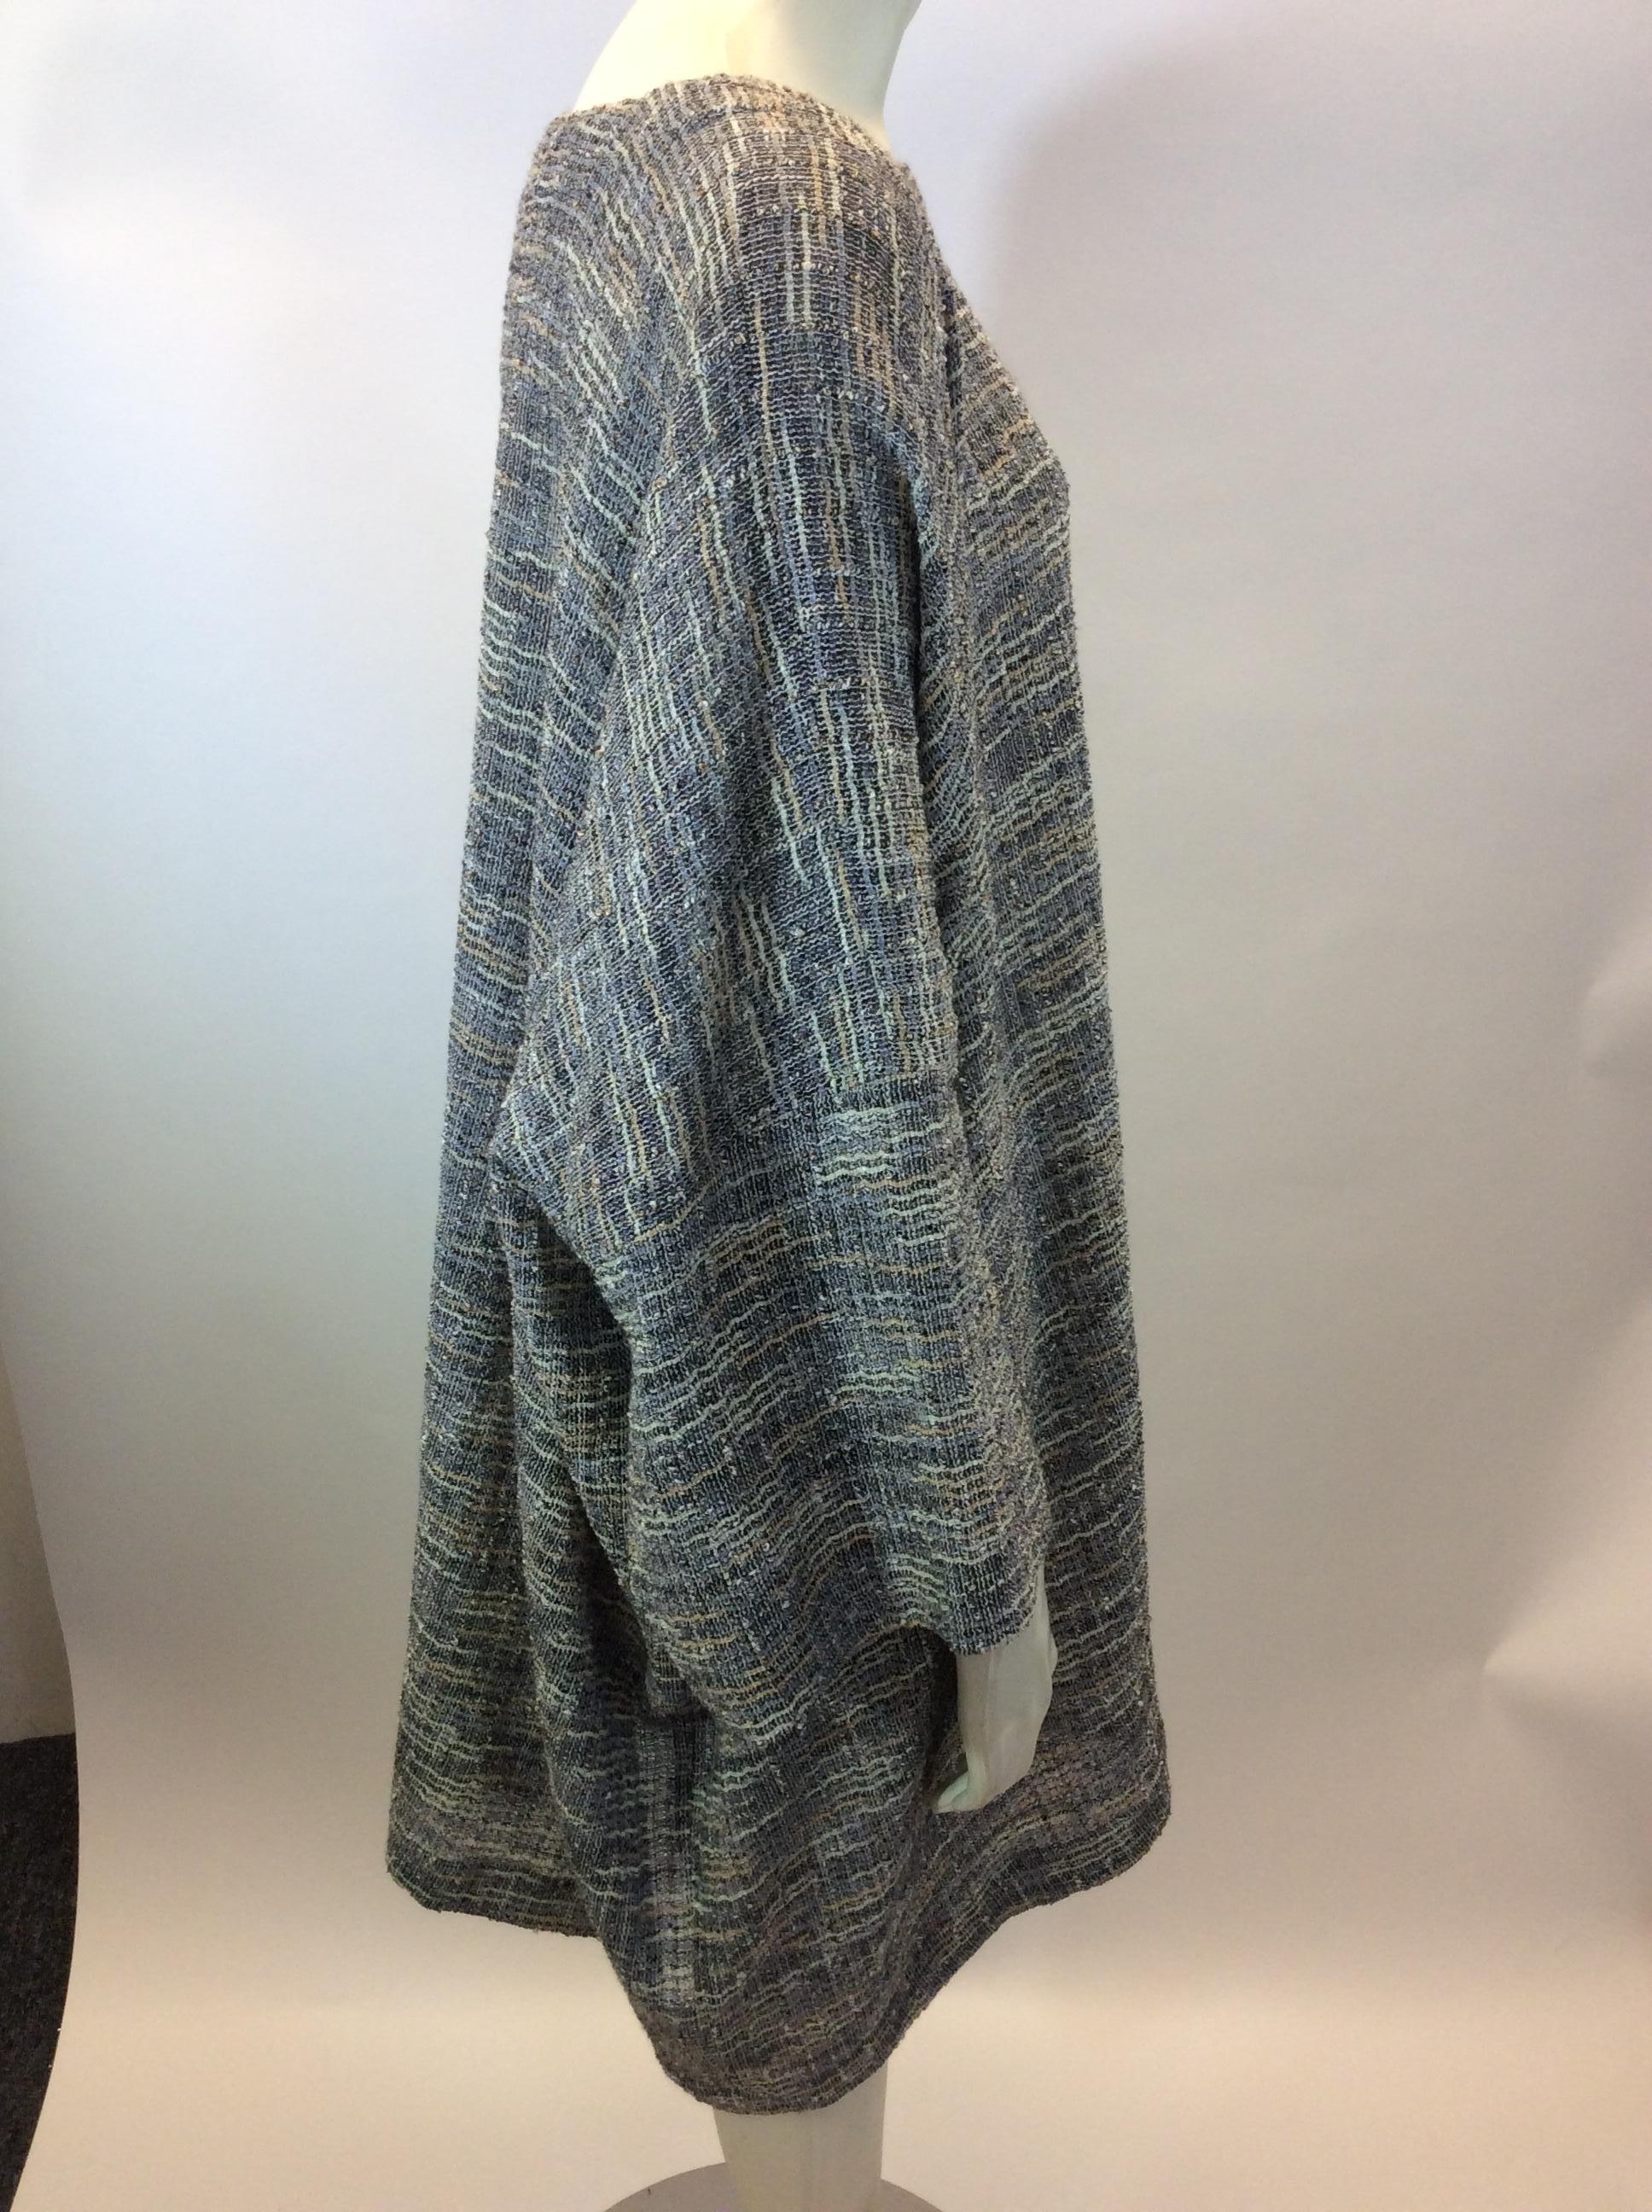 Eskandar Tweed Multi-Color Poncho In Excellent Condition For Sale In Narberth, PA